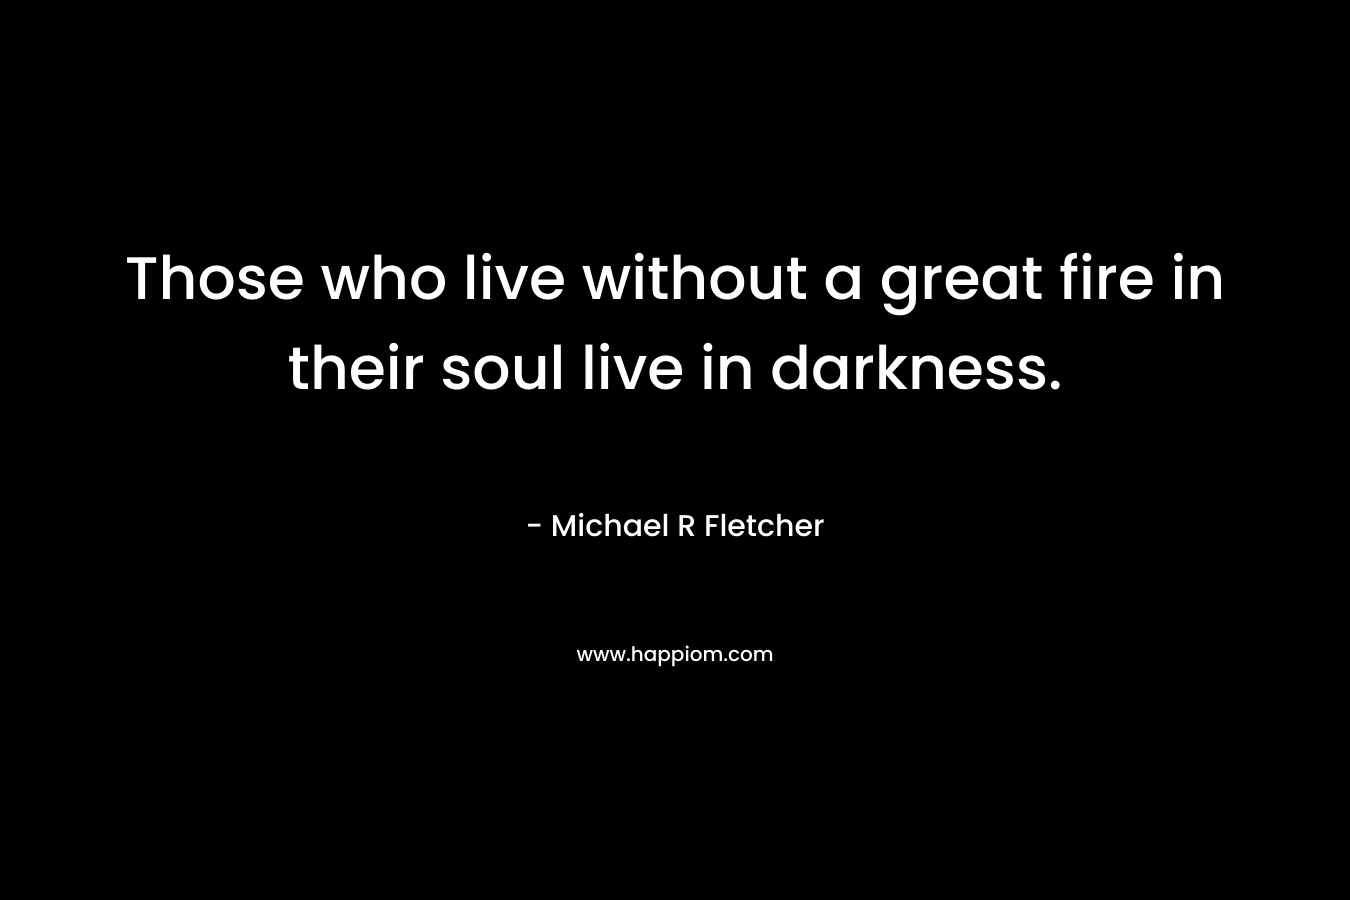 Those who live without a great fire in their soul live in darkness.